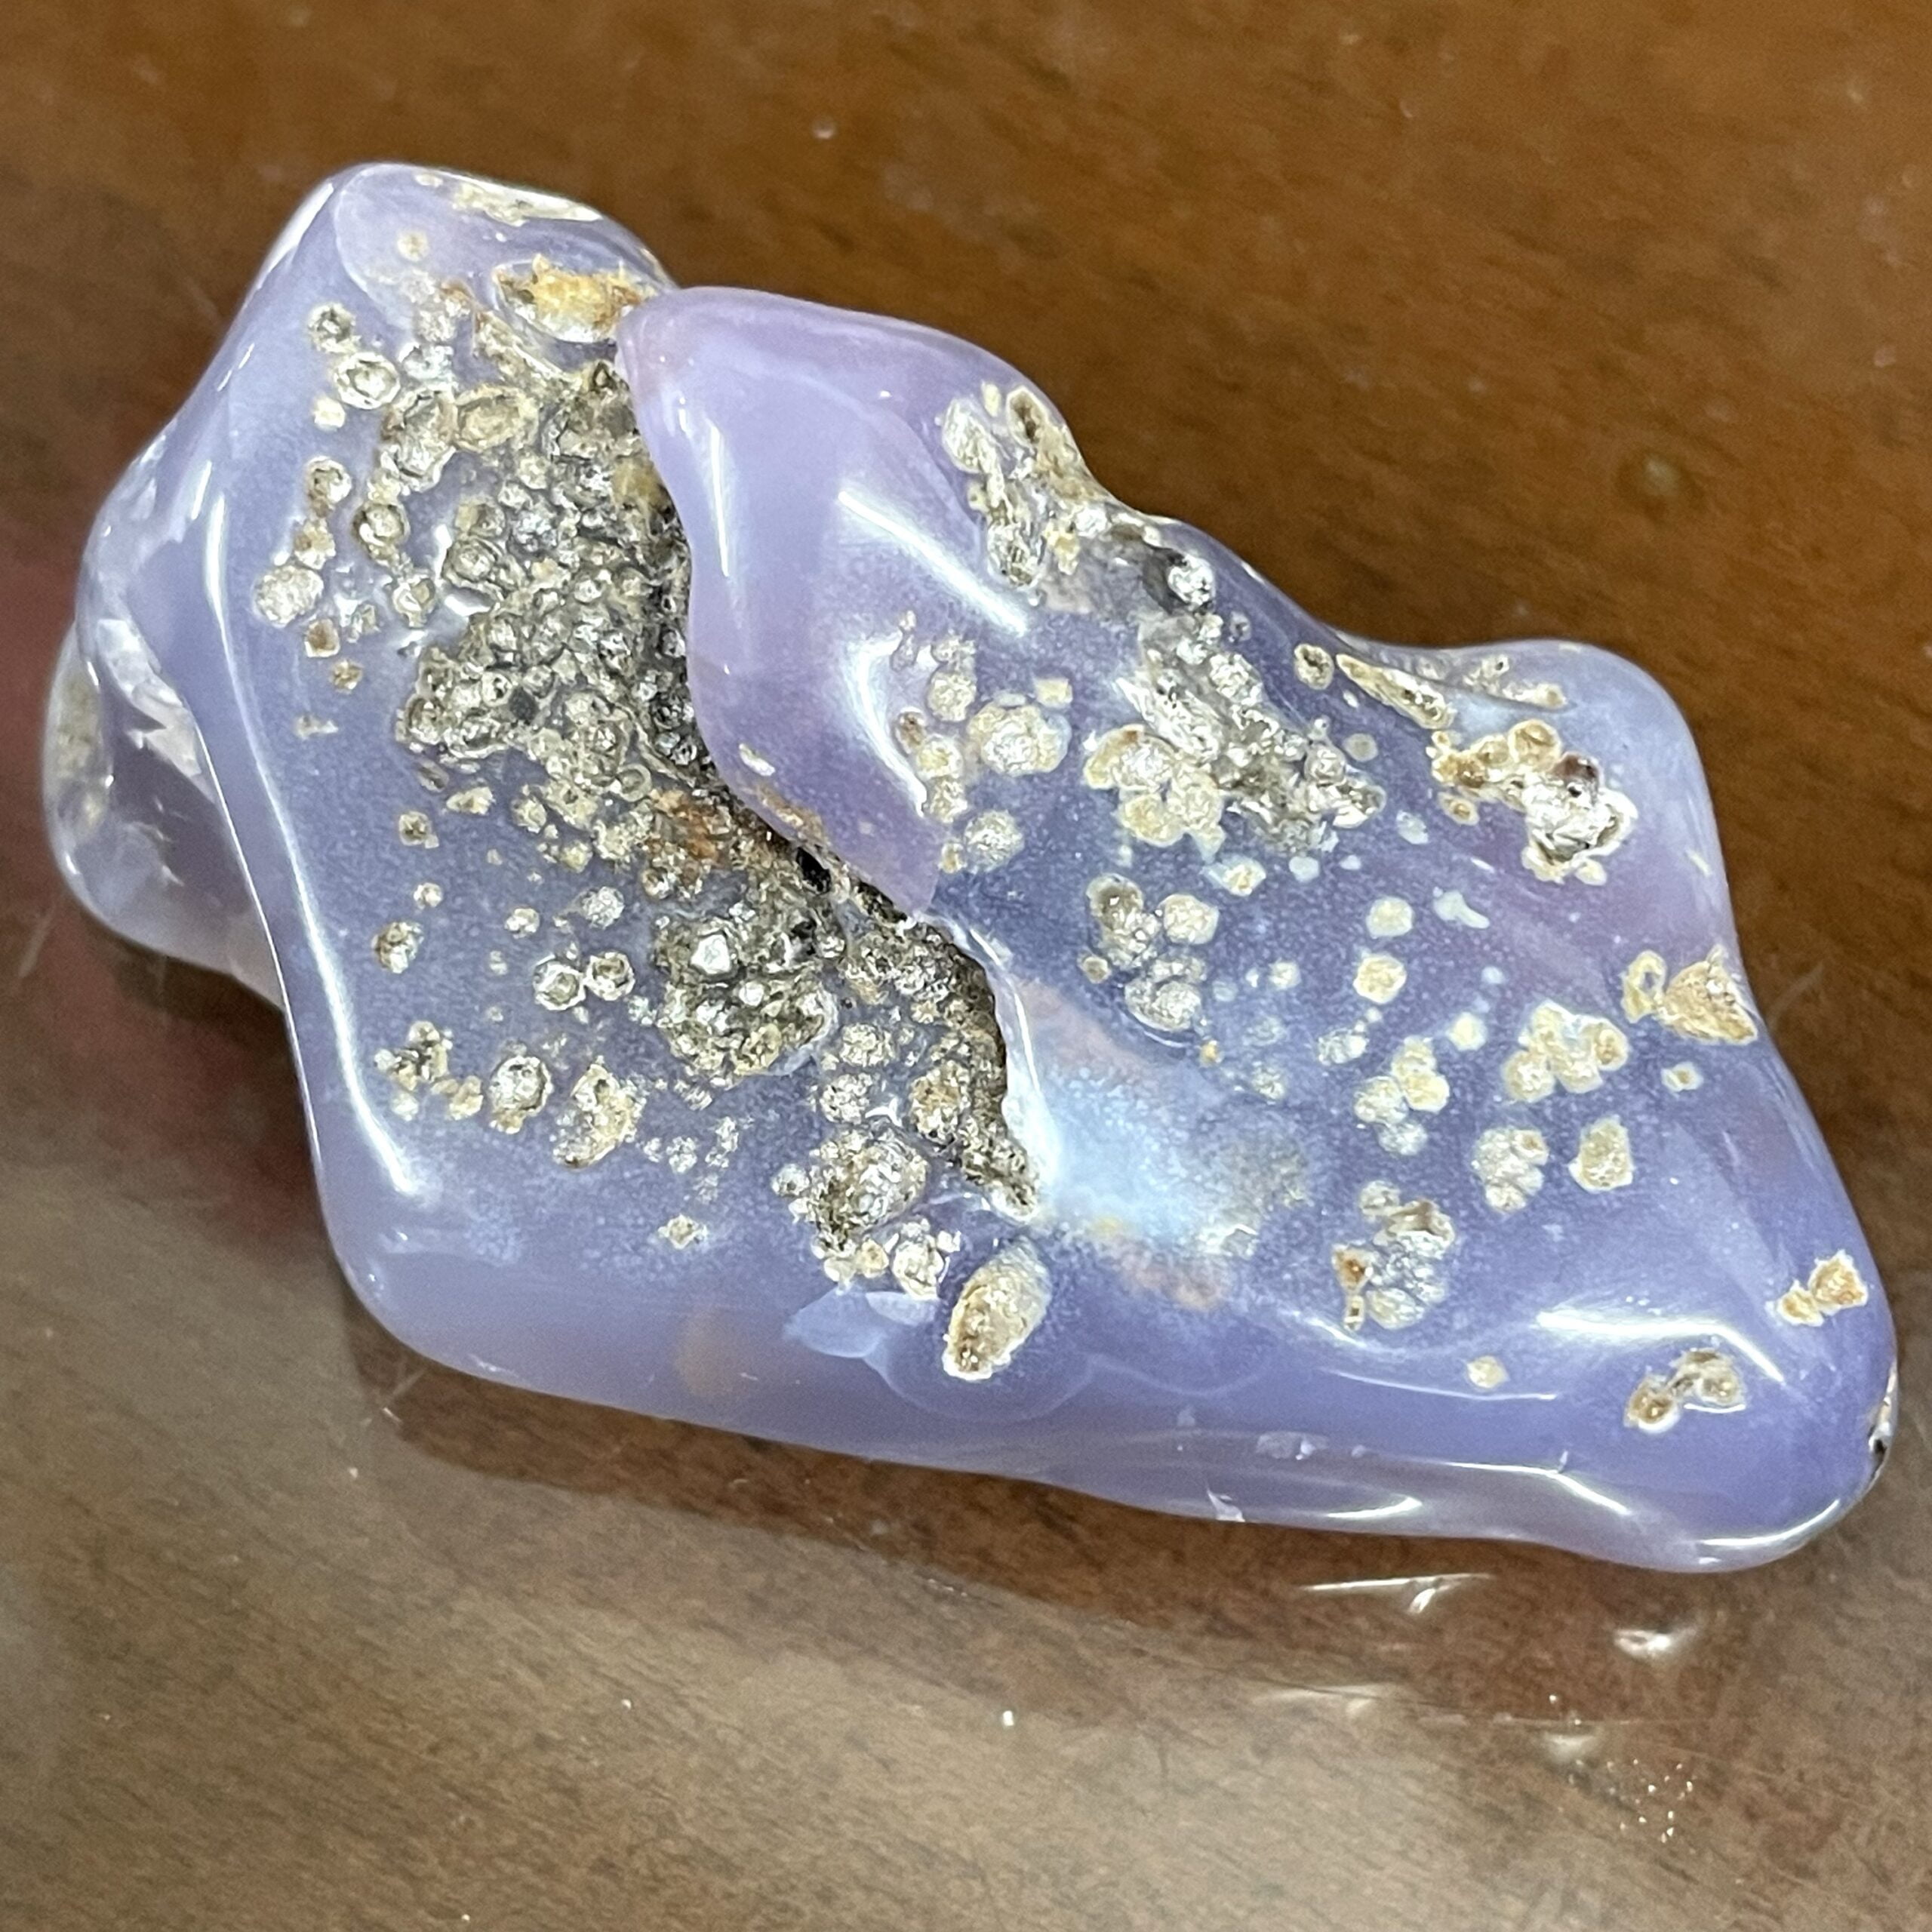 Holly Blue (Calapooia) Agate 30.89g: Said to Enhance Psychic Abilities #HBX5